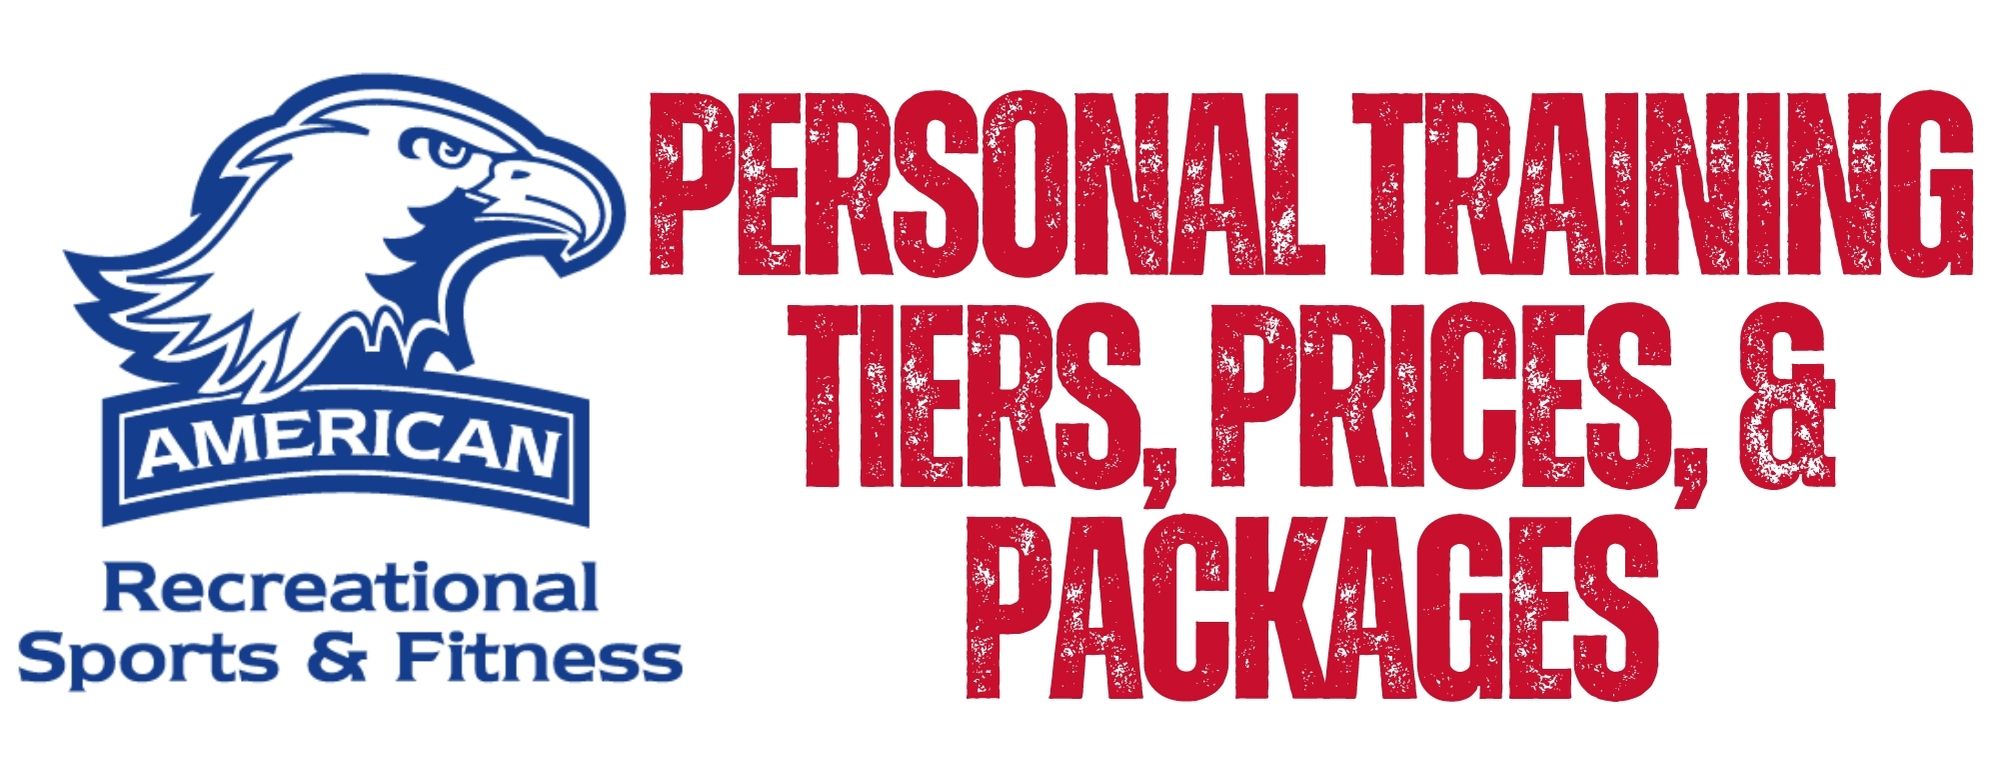 Learn more about personal training tiers, prices, and packages.